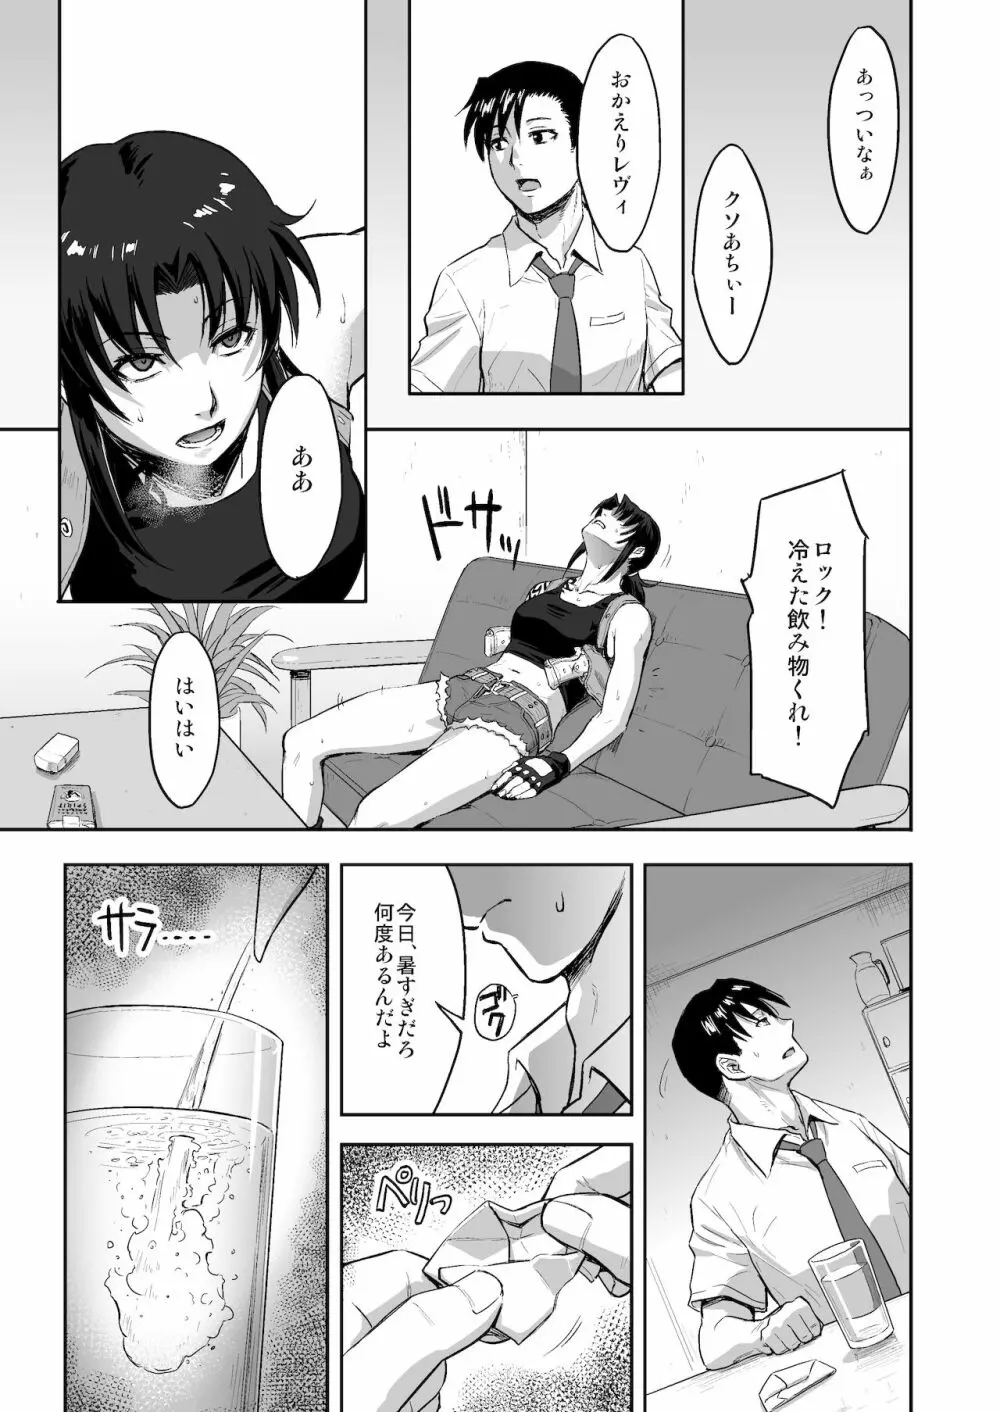 SLEEPING Revy - page2